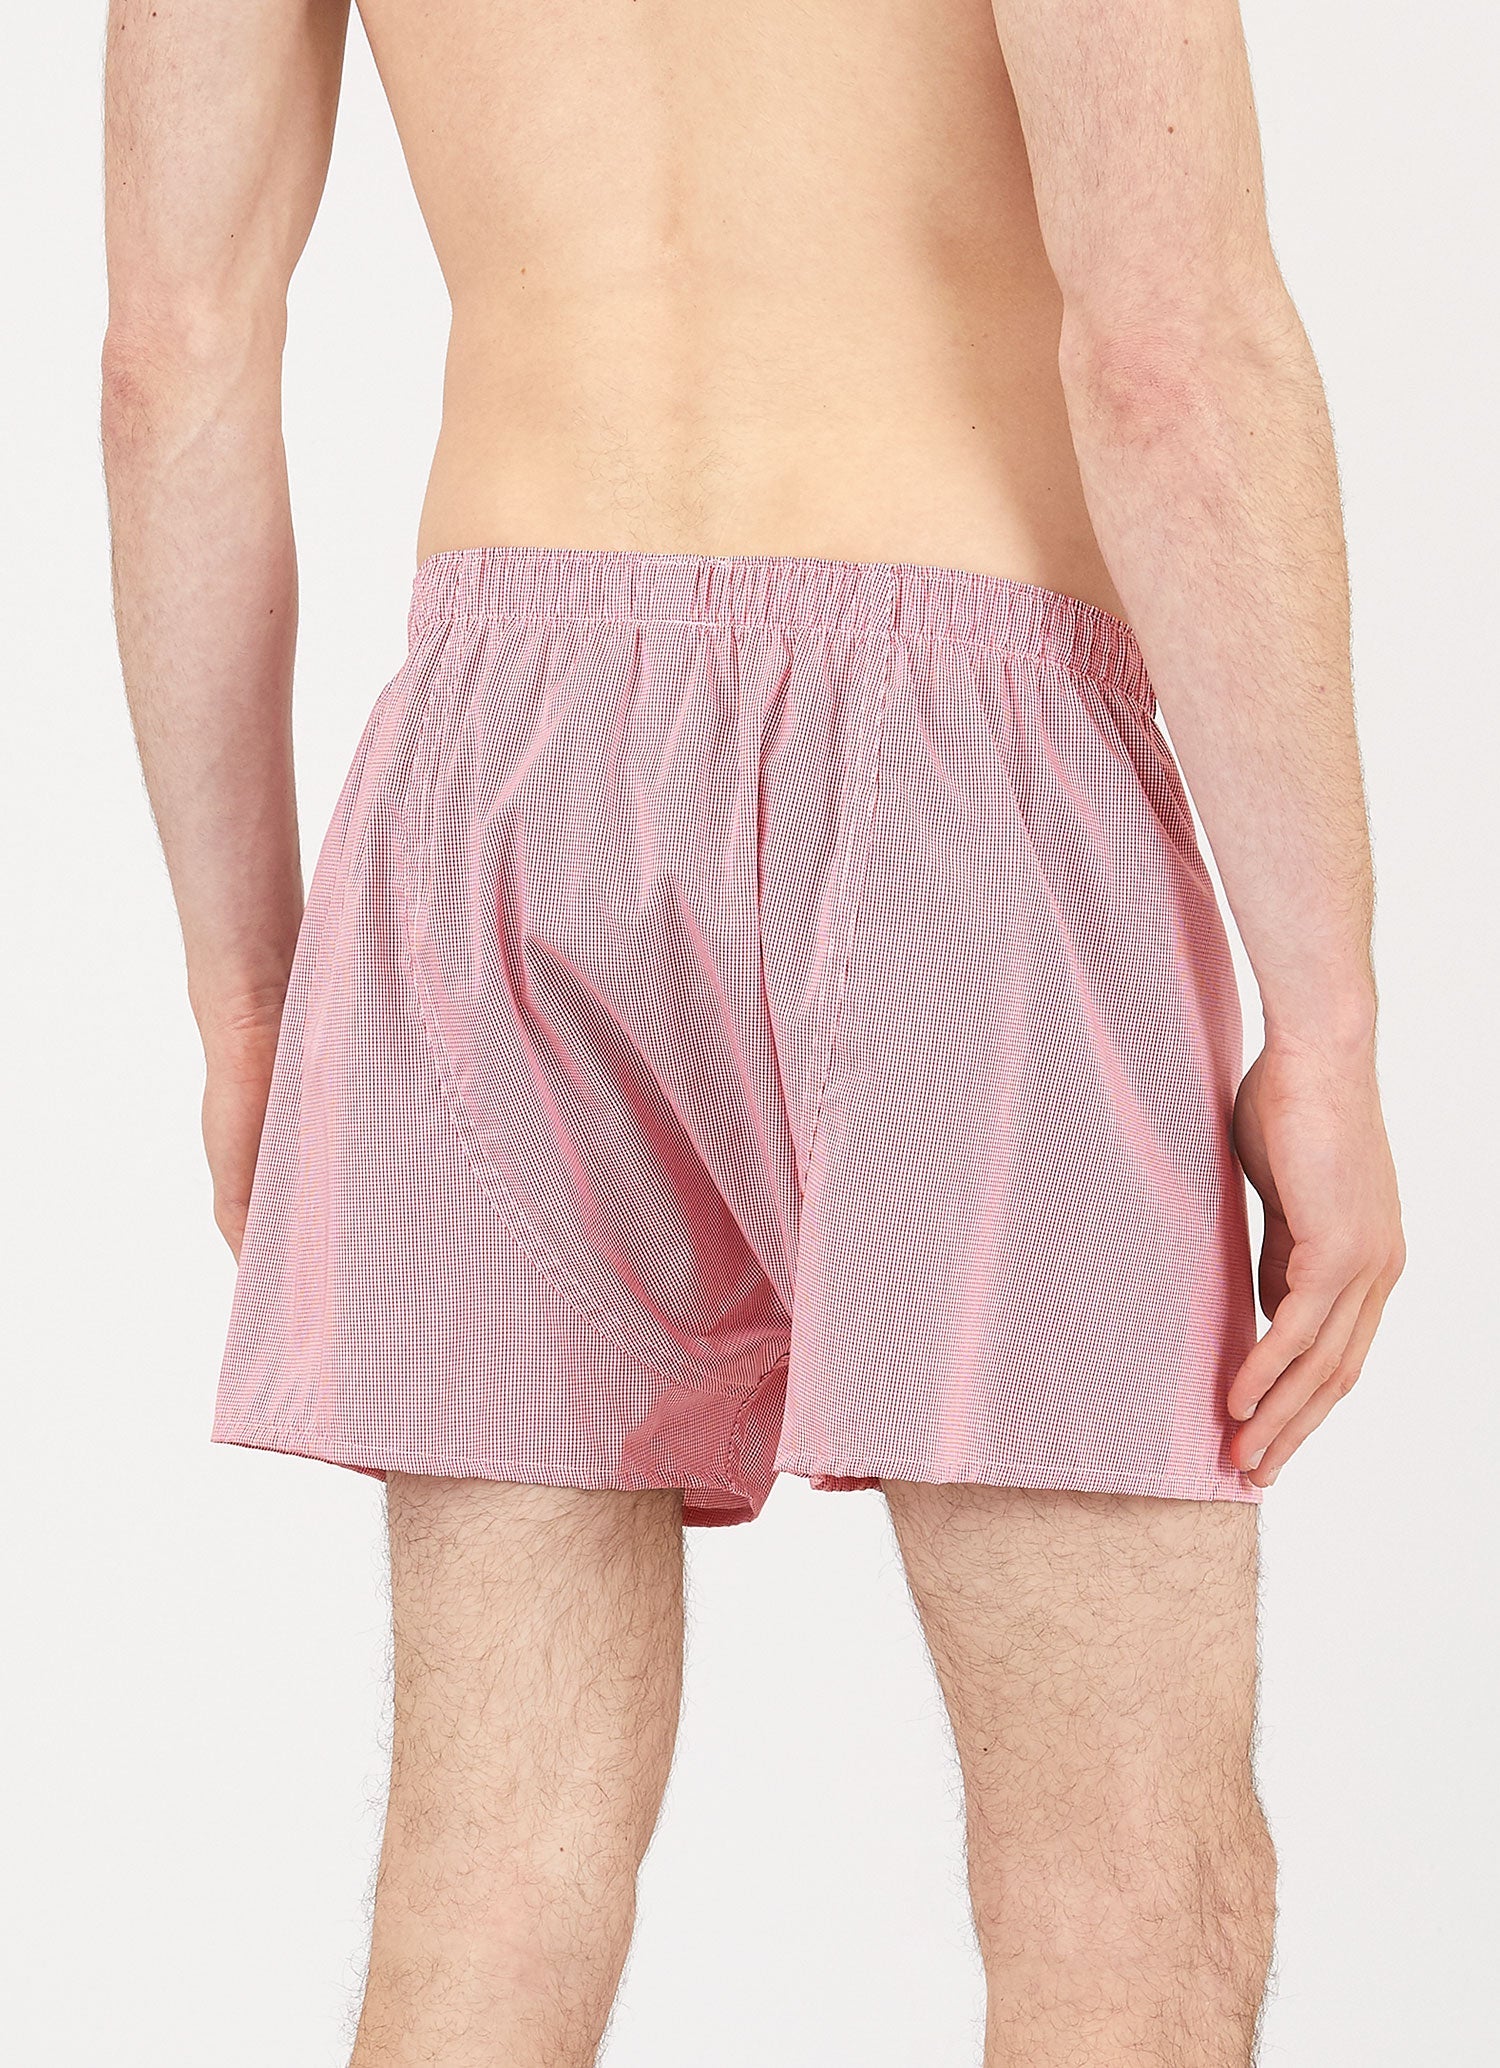 Men's Classic Boxer Shorts in White/Red Micro Gingham